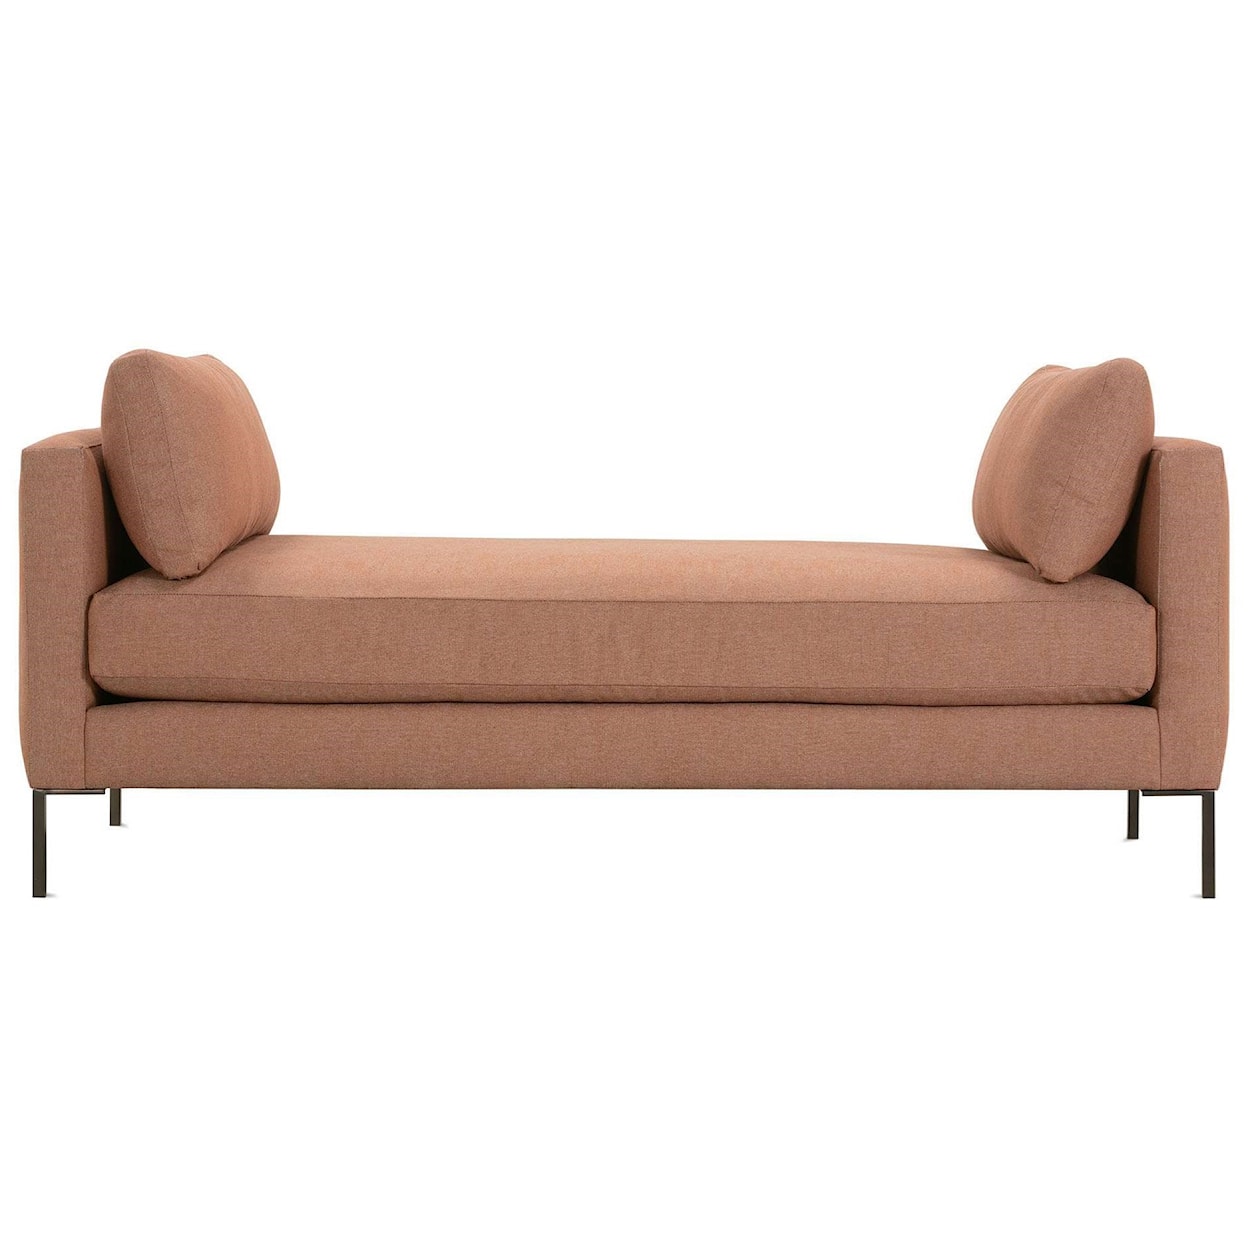 Rowe Oliver Long Settee